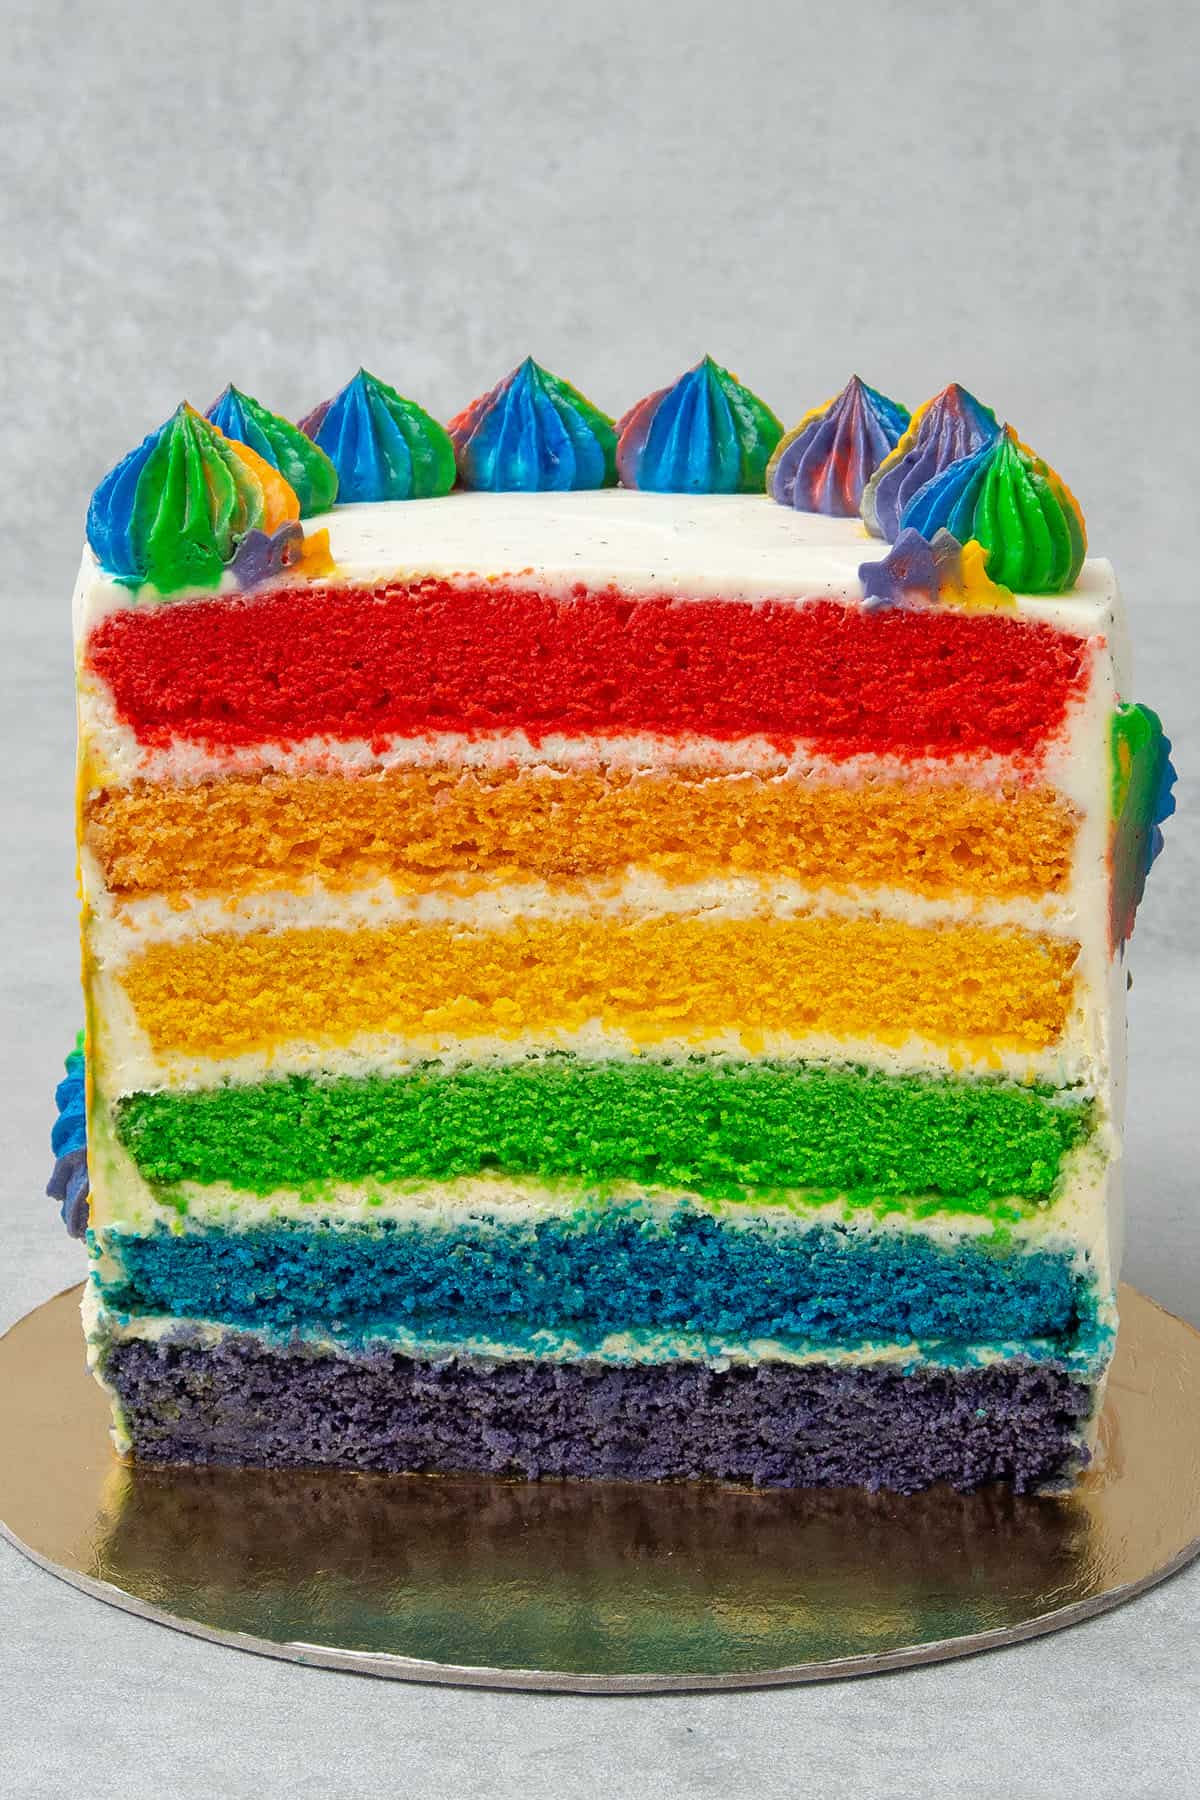 A half Rainbow cake on a golden paper plate.